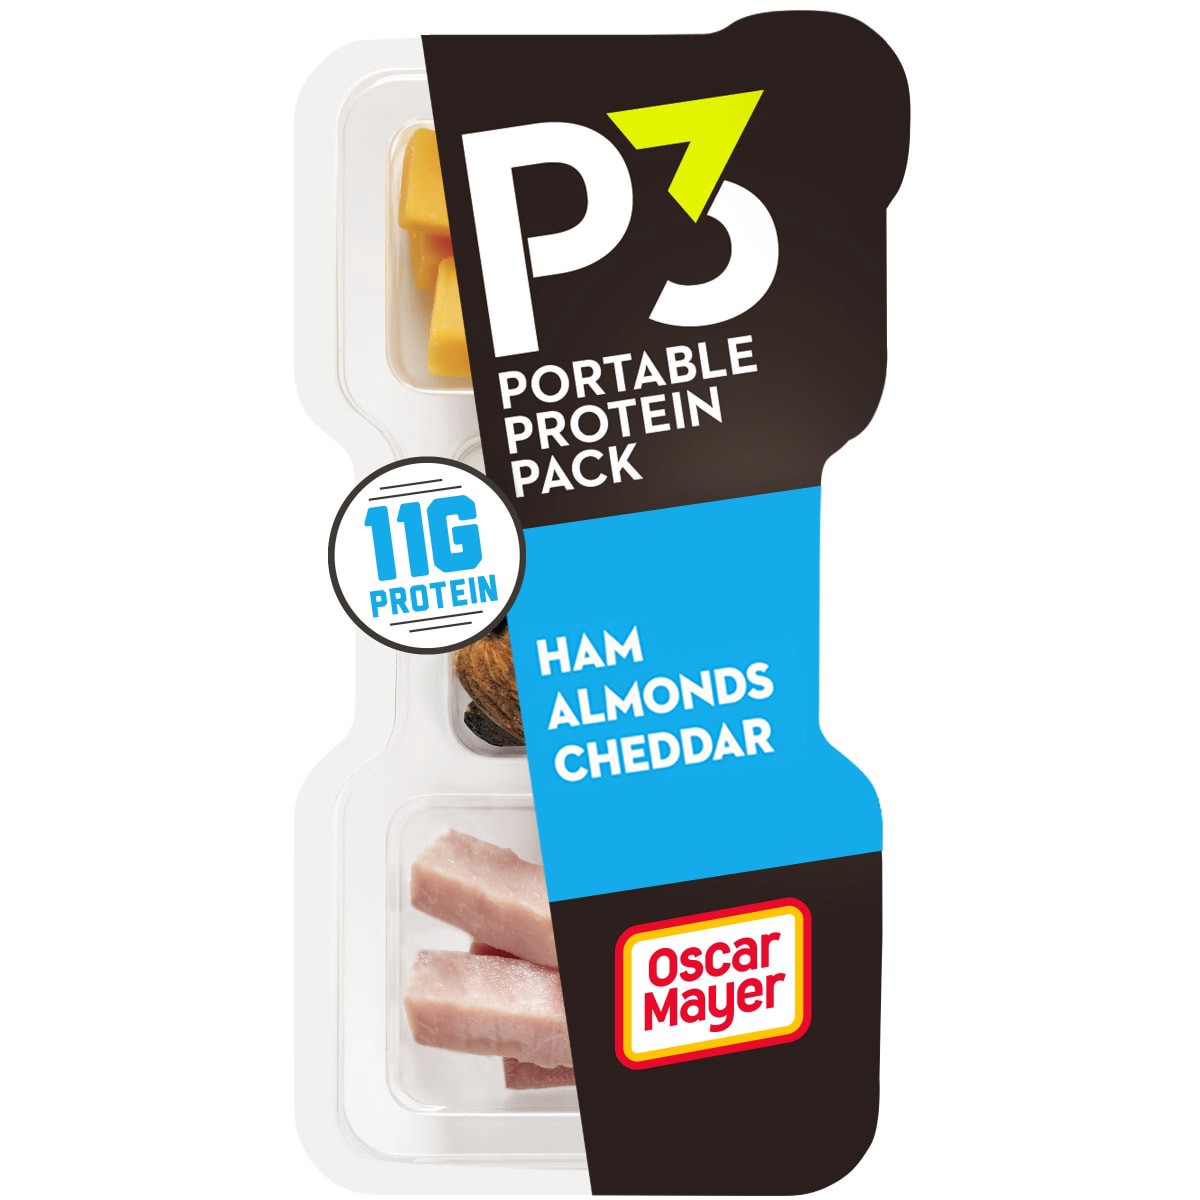 slide 1 of 29, Oscar Mayer P3 Portable Protein Snack Pack with Ham, Almonds & Cheddar Cheese, for School Lunch or Easy Snack Tray, 2 oz